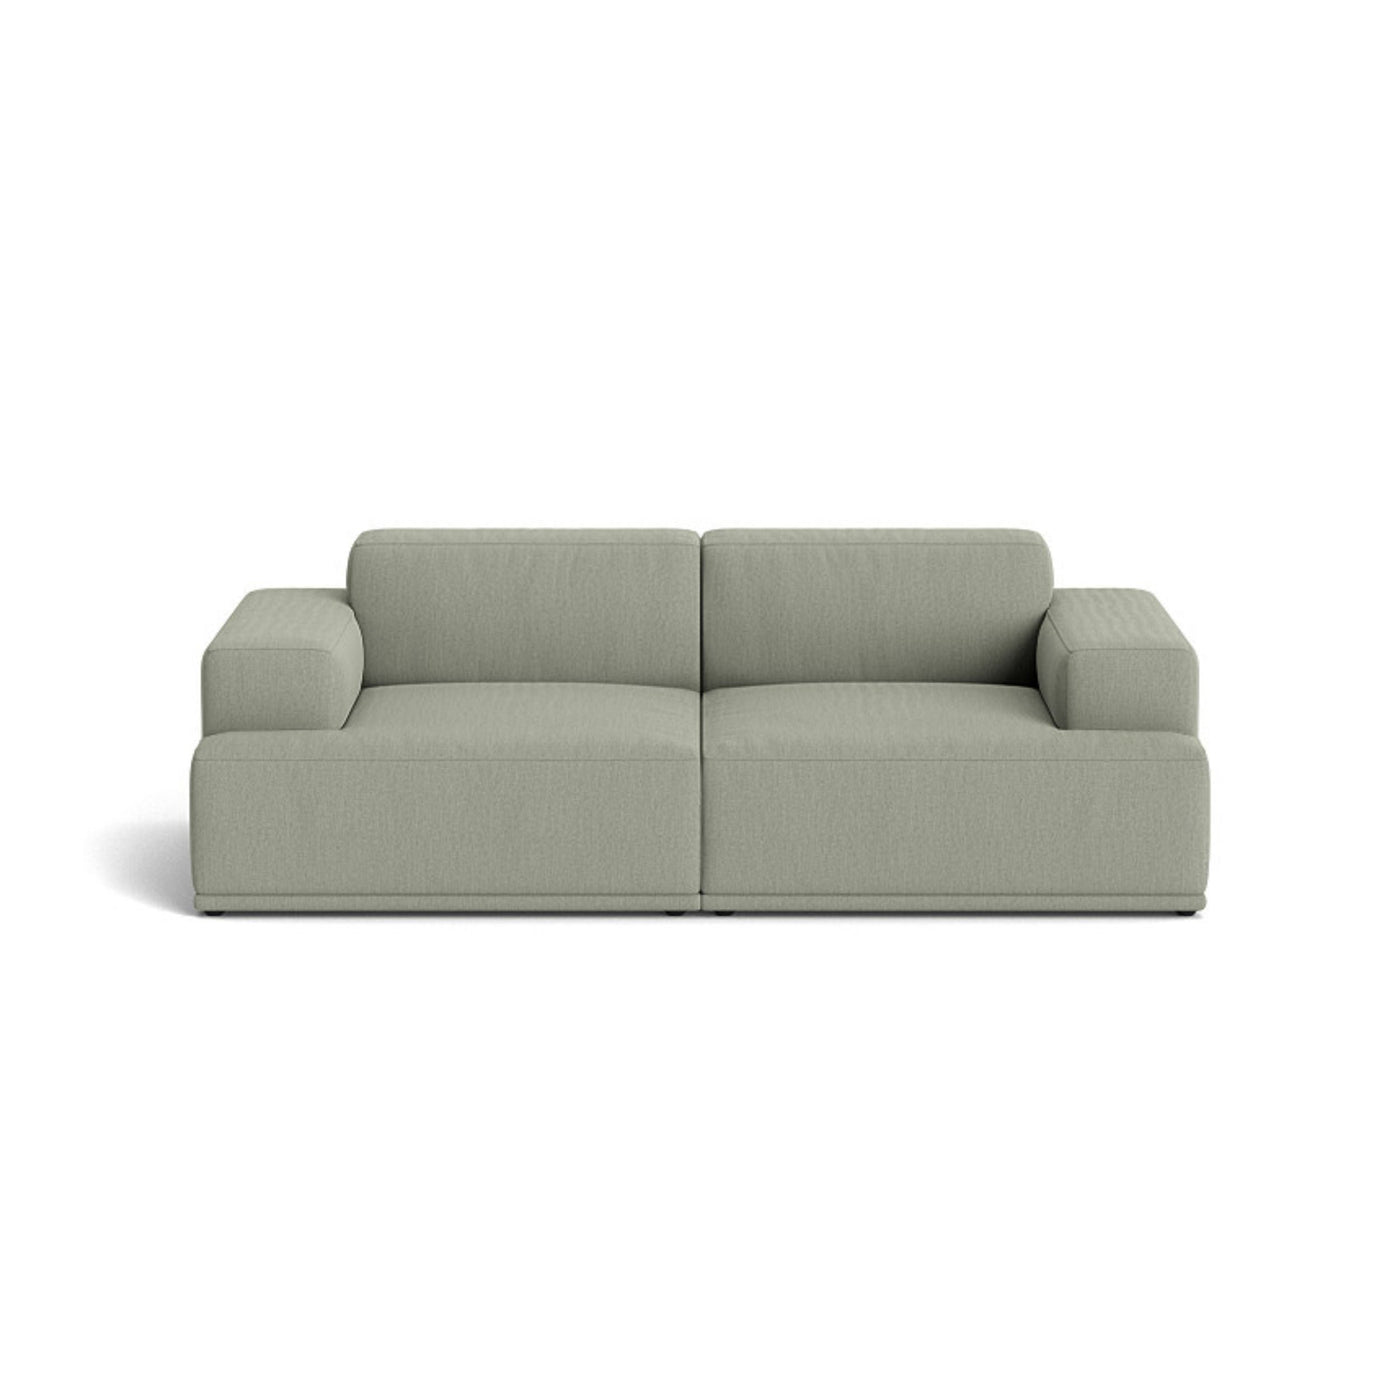 Muuto Connect Soft Modular 2 Seater Sofa, configuration 1. made-to-order from someday designs. #colour_re-wool-408